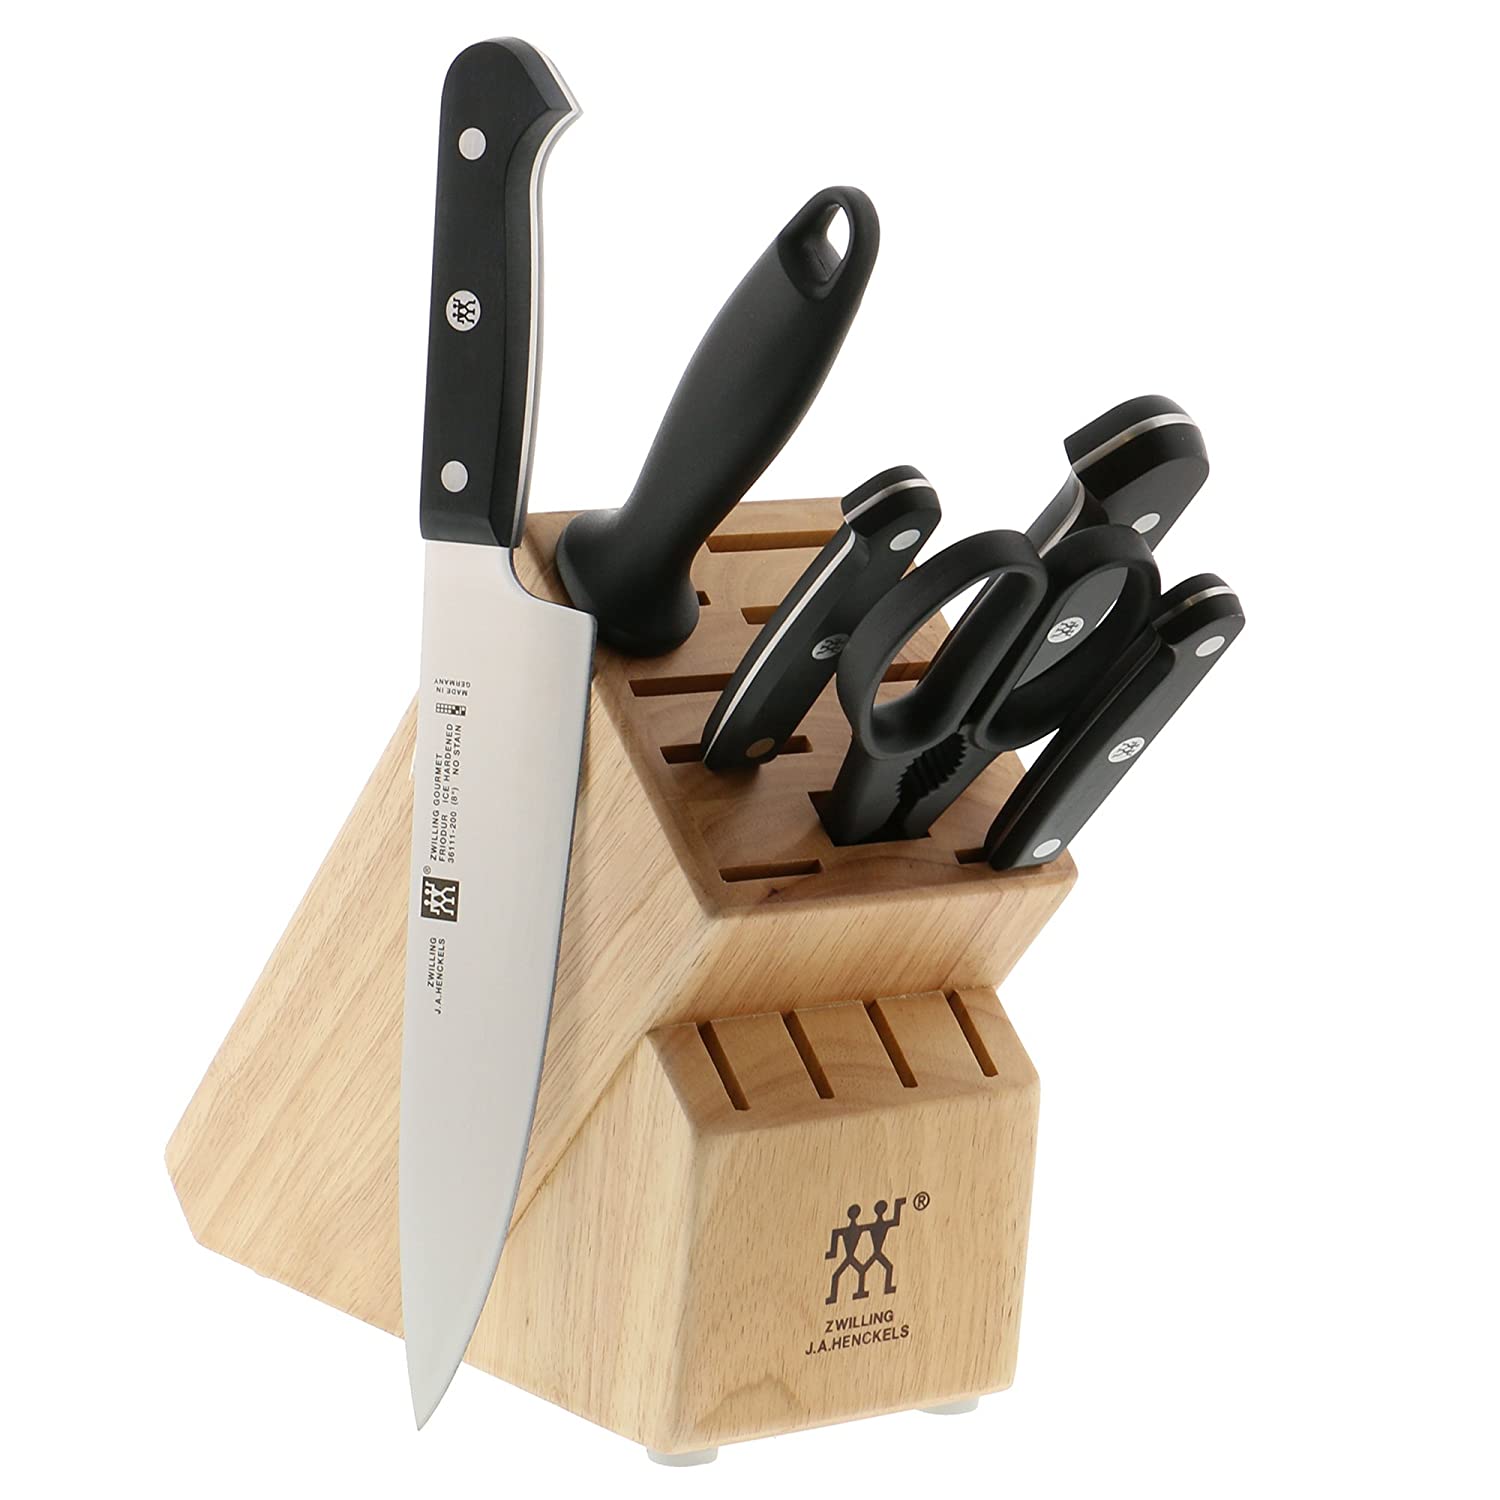 zwilling j.a. henckels gourmet knife block set isolated on white background